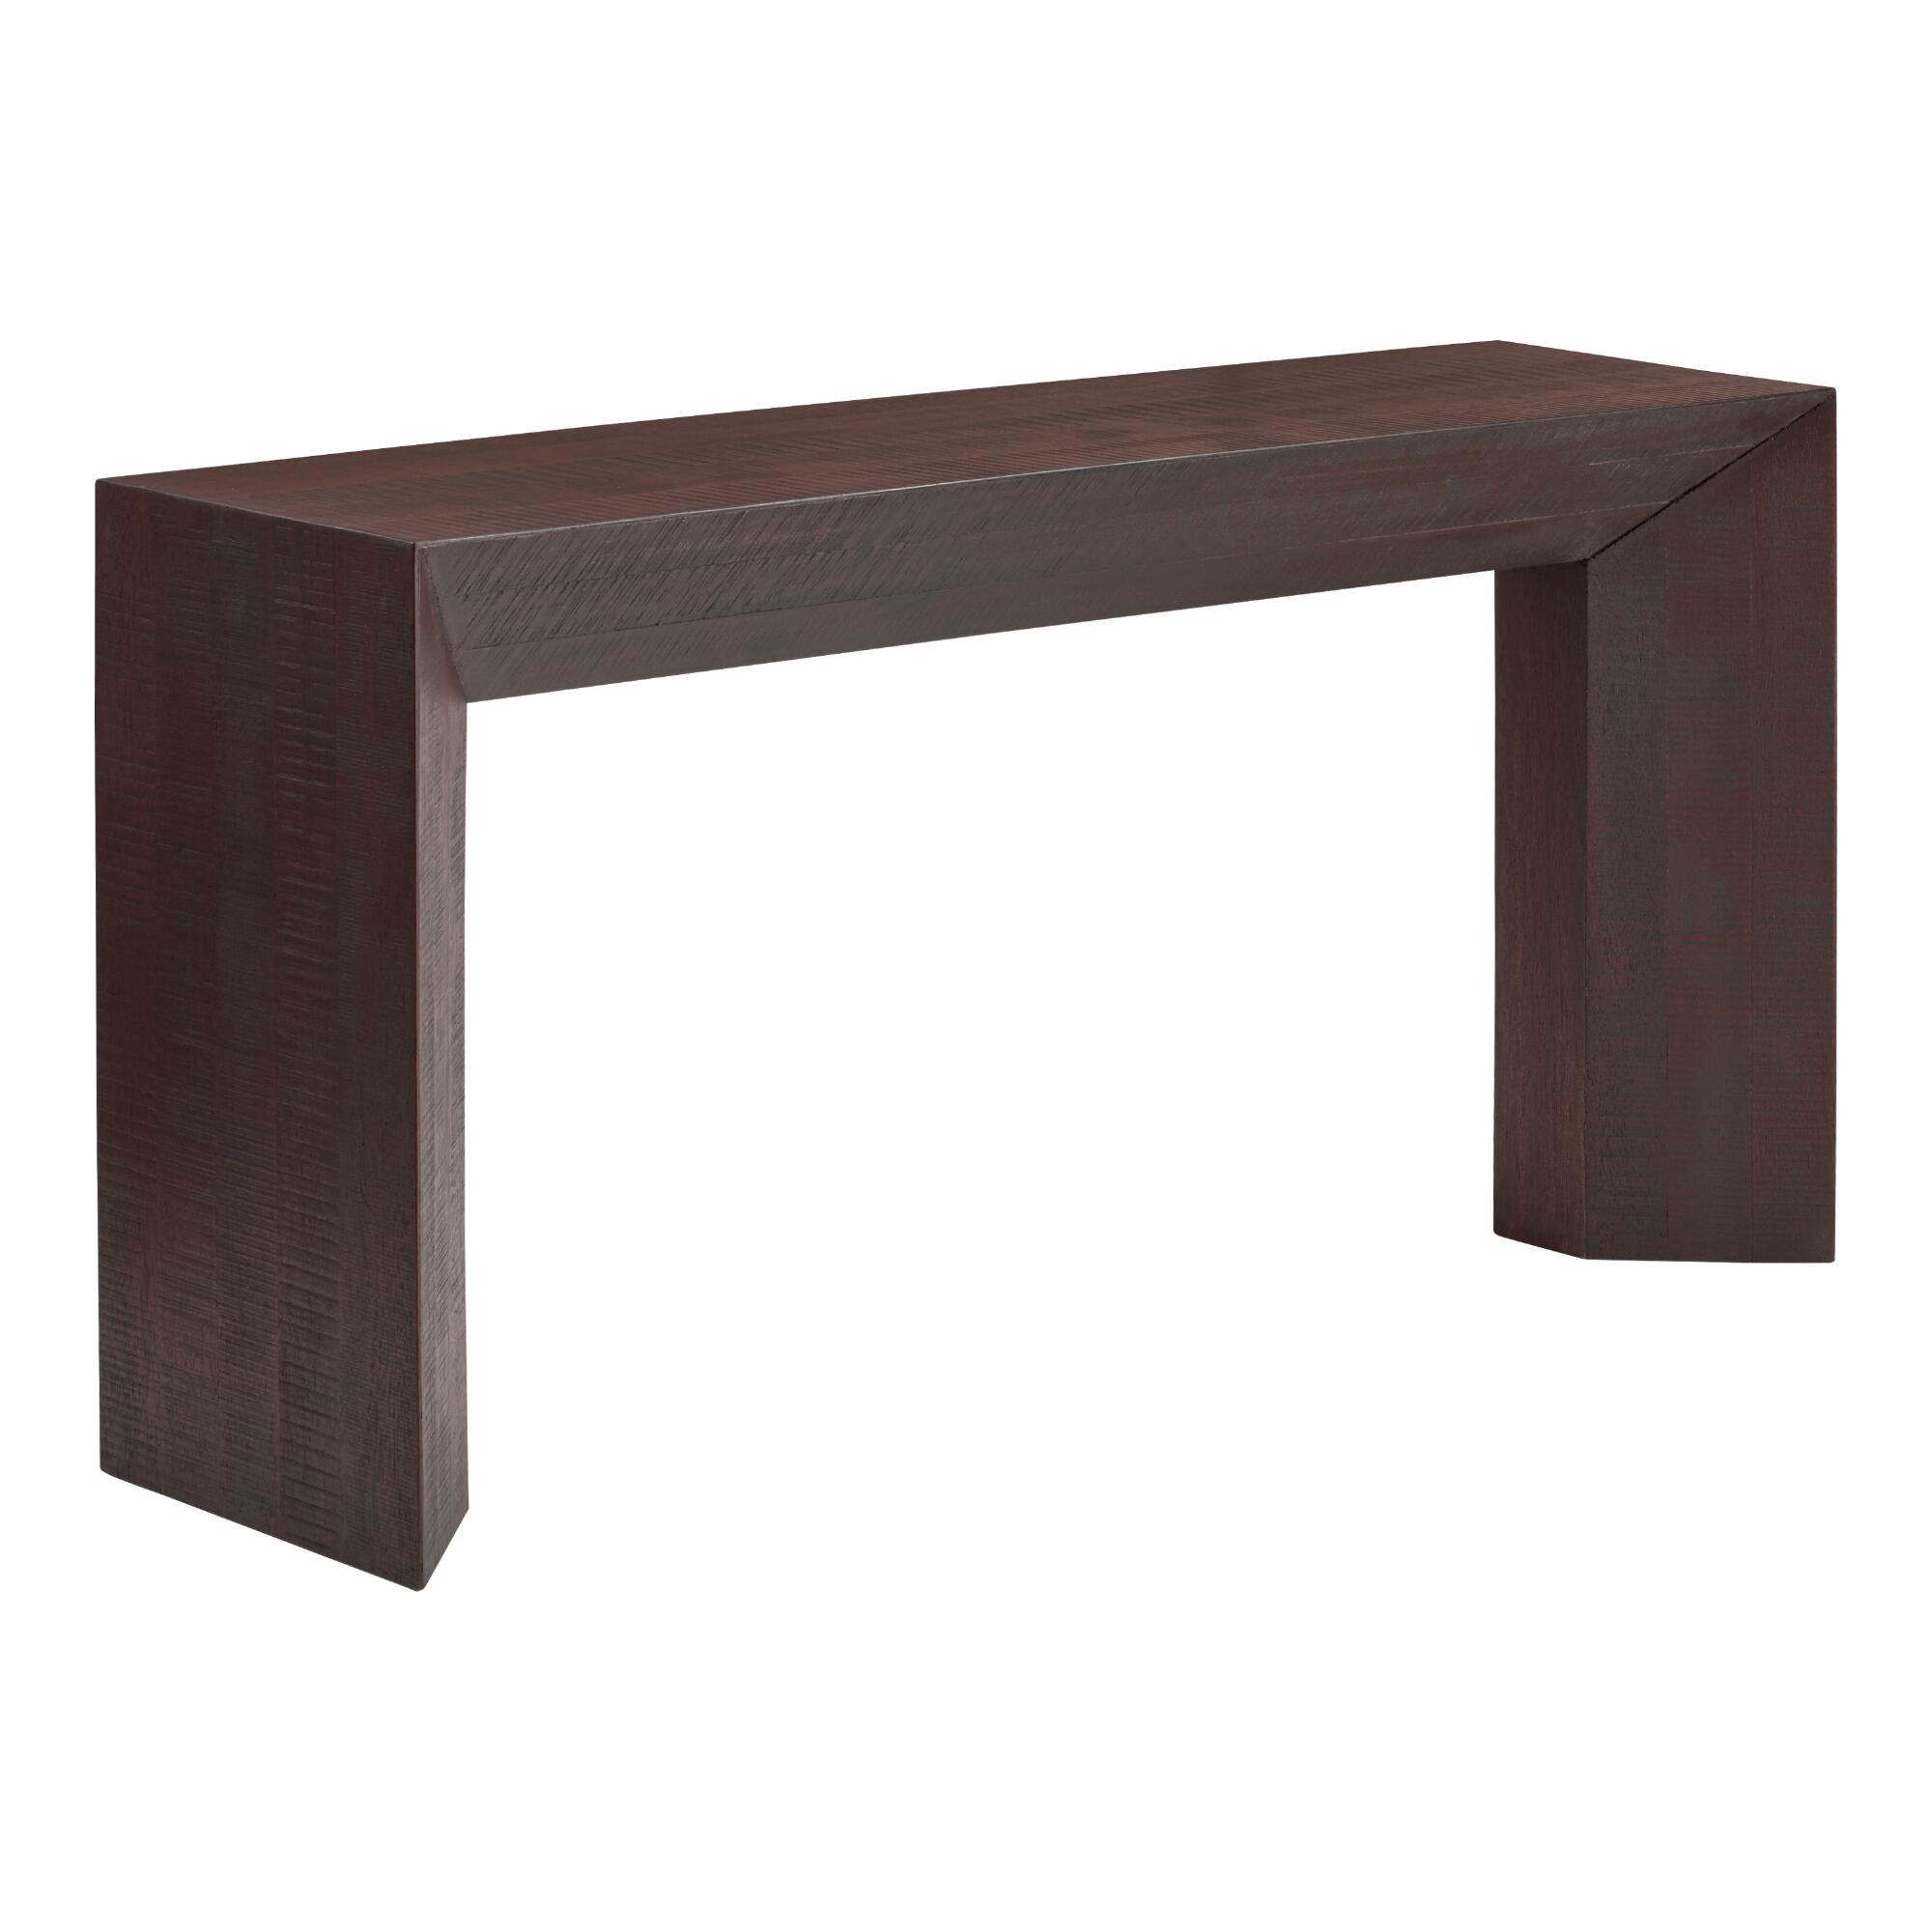 Walnut Brown Wood Jaque Console Table by World Market